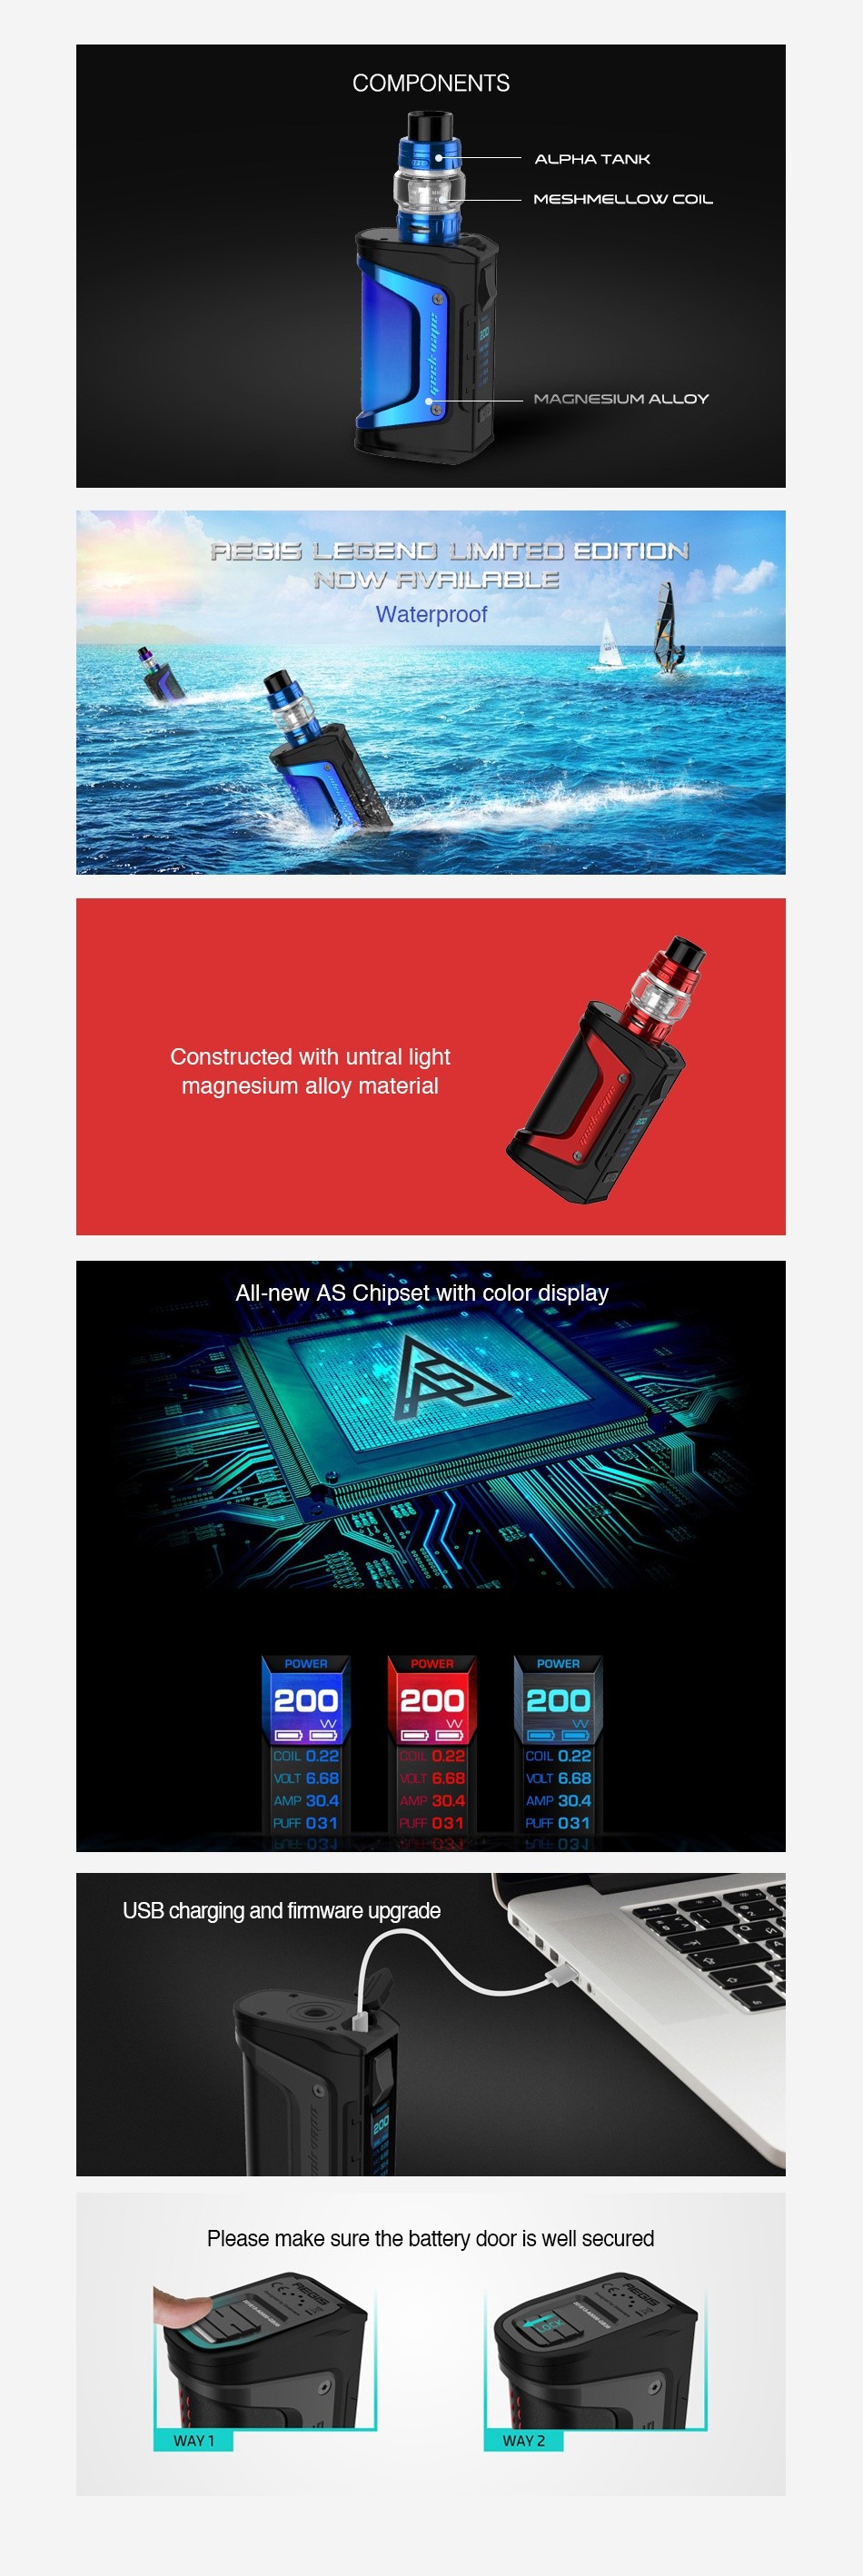 Geekvape Aegis Legend 200W TC Kit with Alpha Tank COMPONENTS LPHA TANK MESHN  LLOW COIL MAGN  SIUM ALLOY   F LE Waterproof constructed with antral light magnesium alloy material All new AS Chipset wIth color display 22  T 6 68  A304 304 USB charging and firmware upgrade Please make sure the battery door is well secured